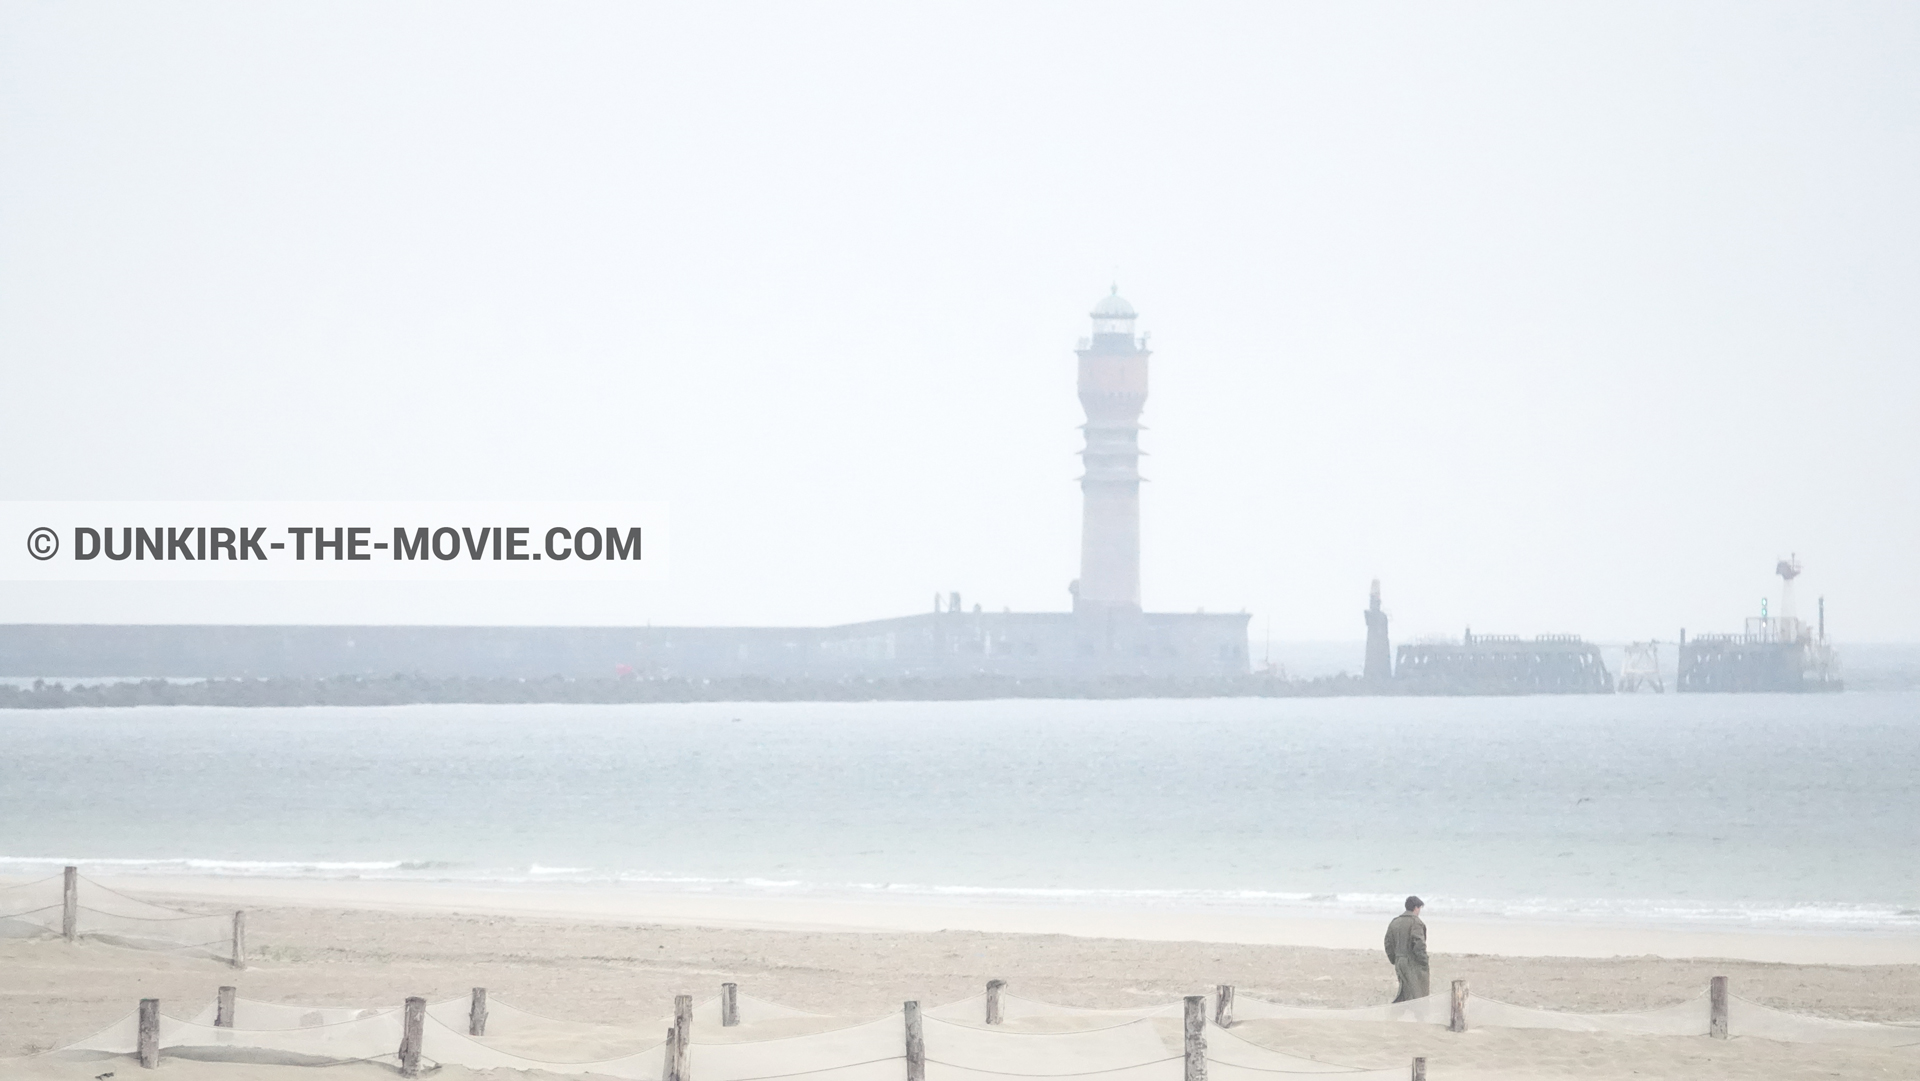 Picture with St Pol sur Mer lighthouse, beach,  from behind the scene of the Dunkirk movie by Nolan